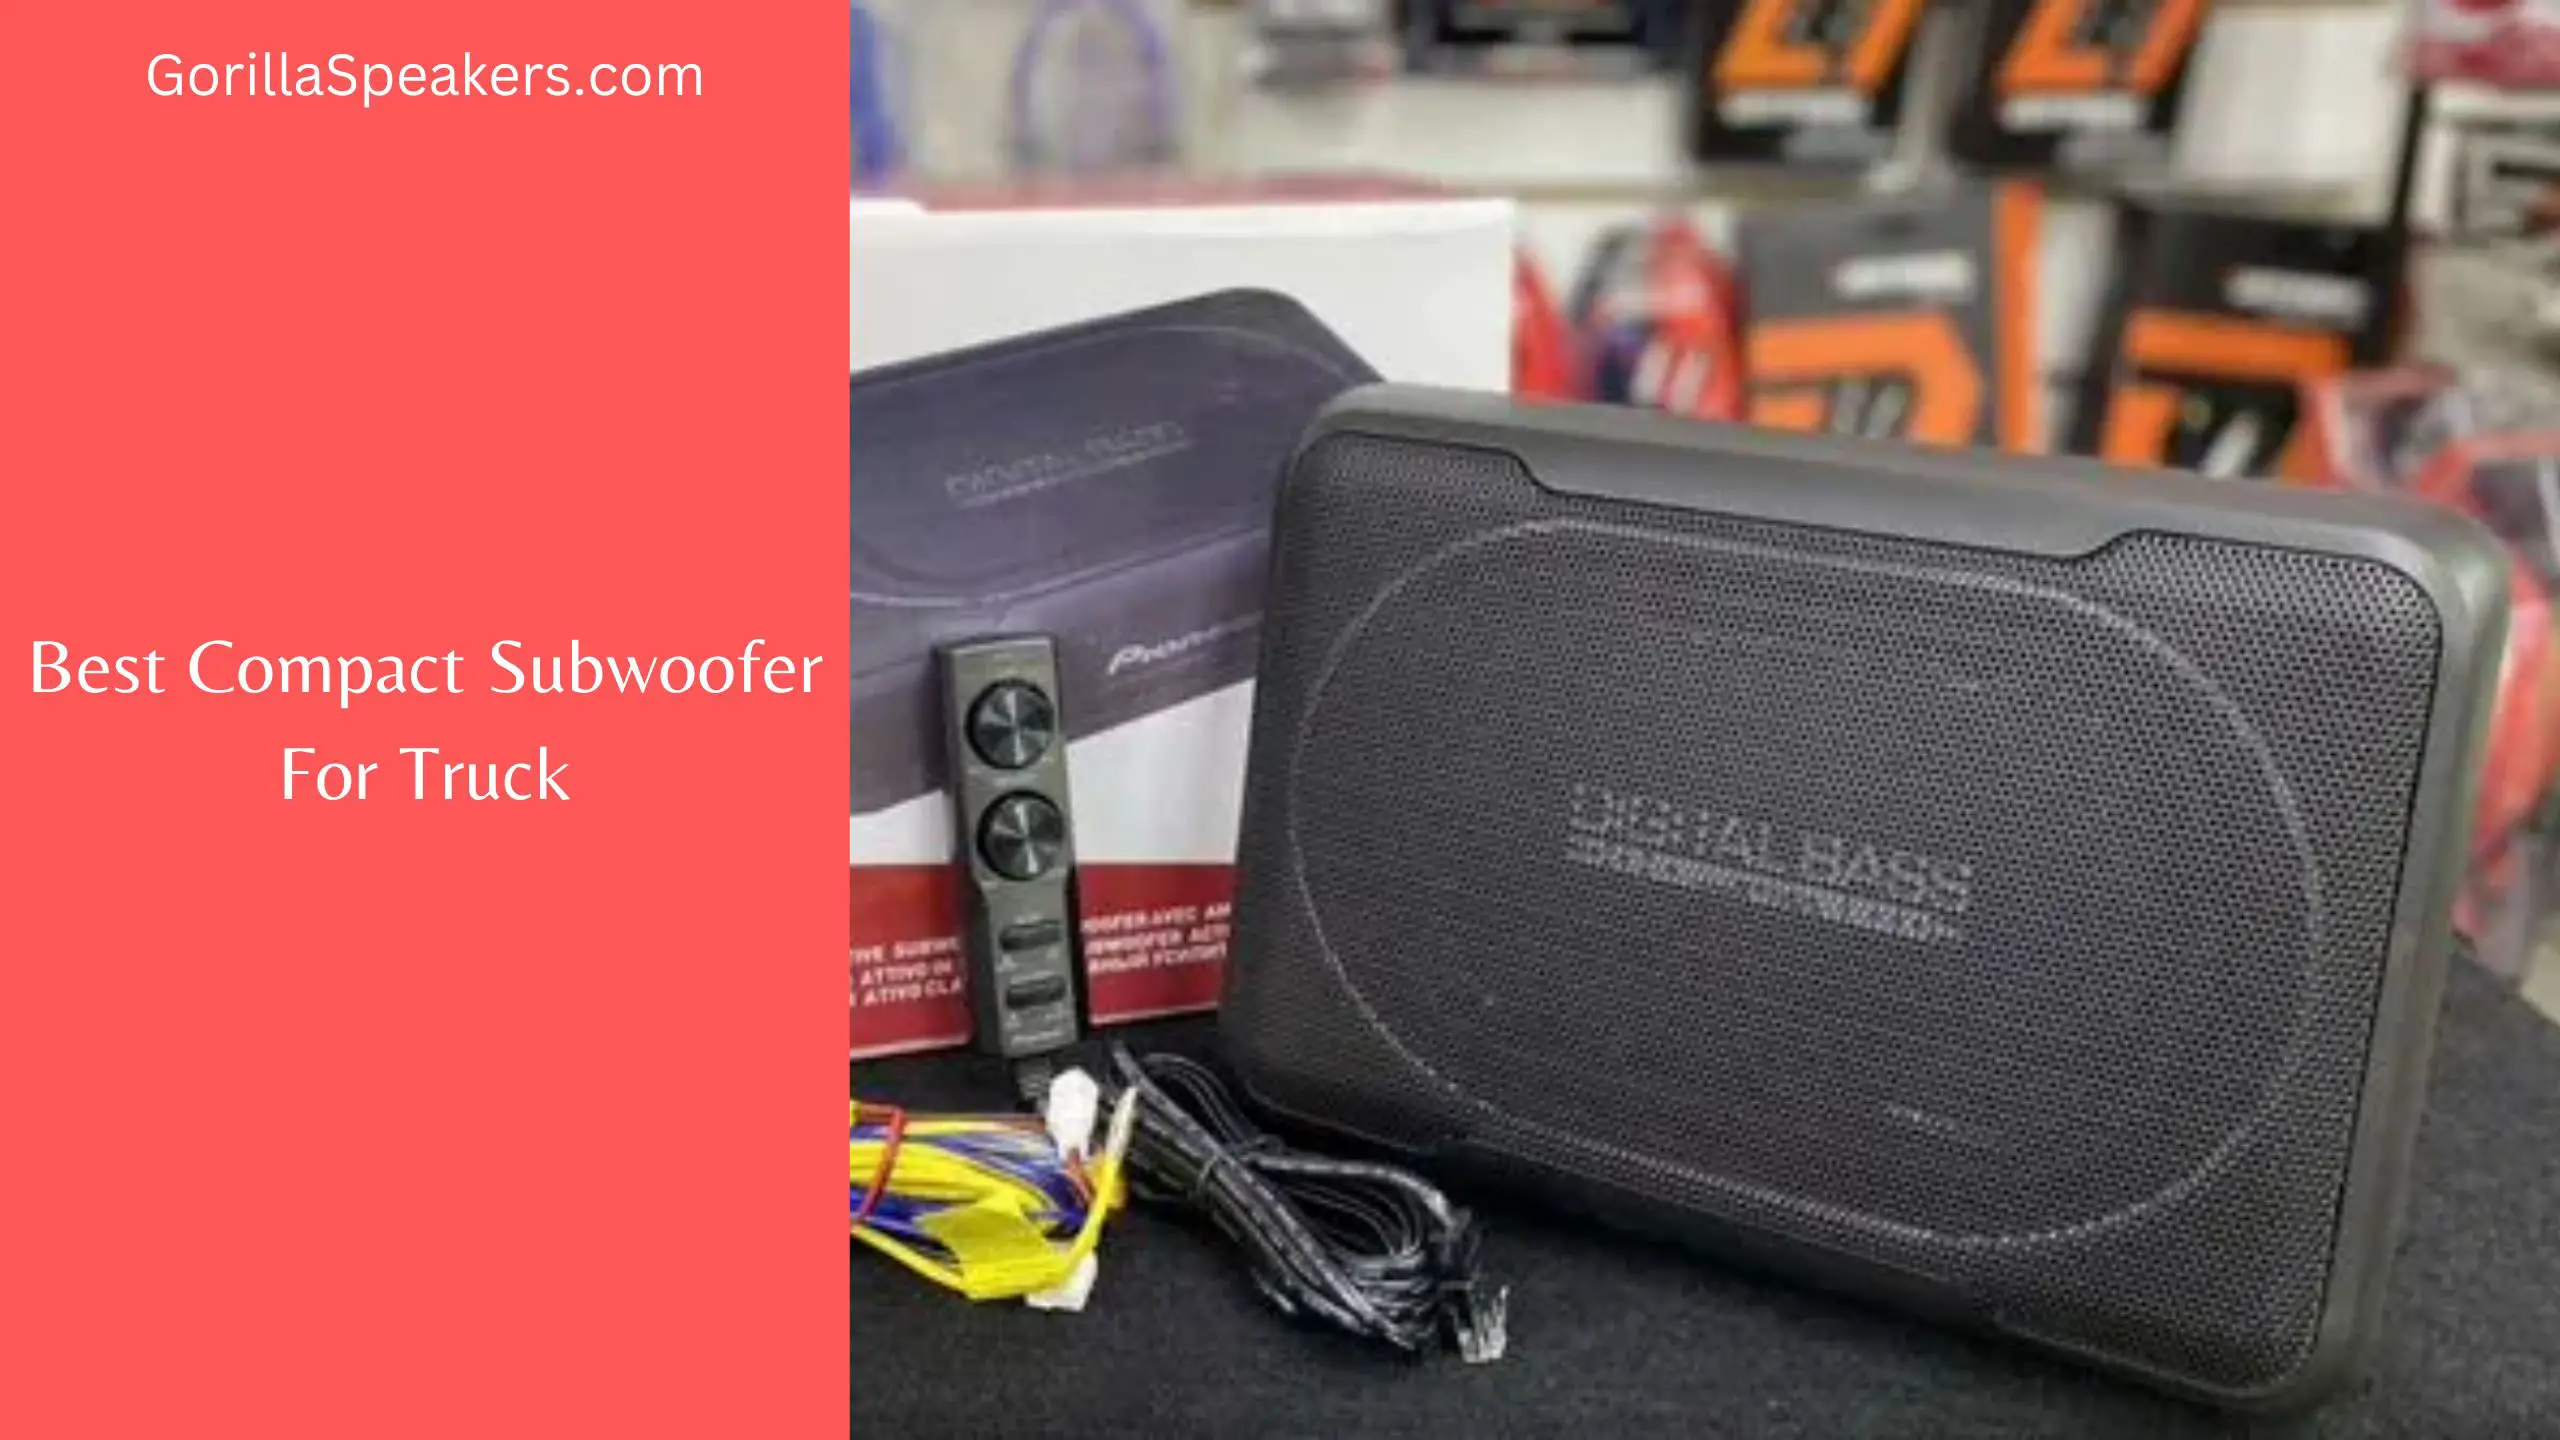 Best Compact Subwoofer For Truck